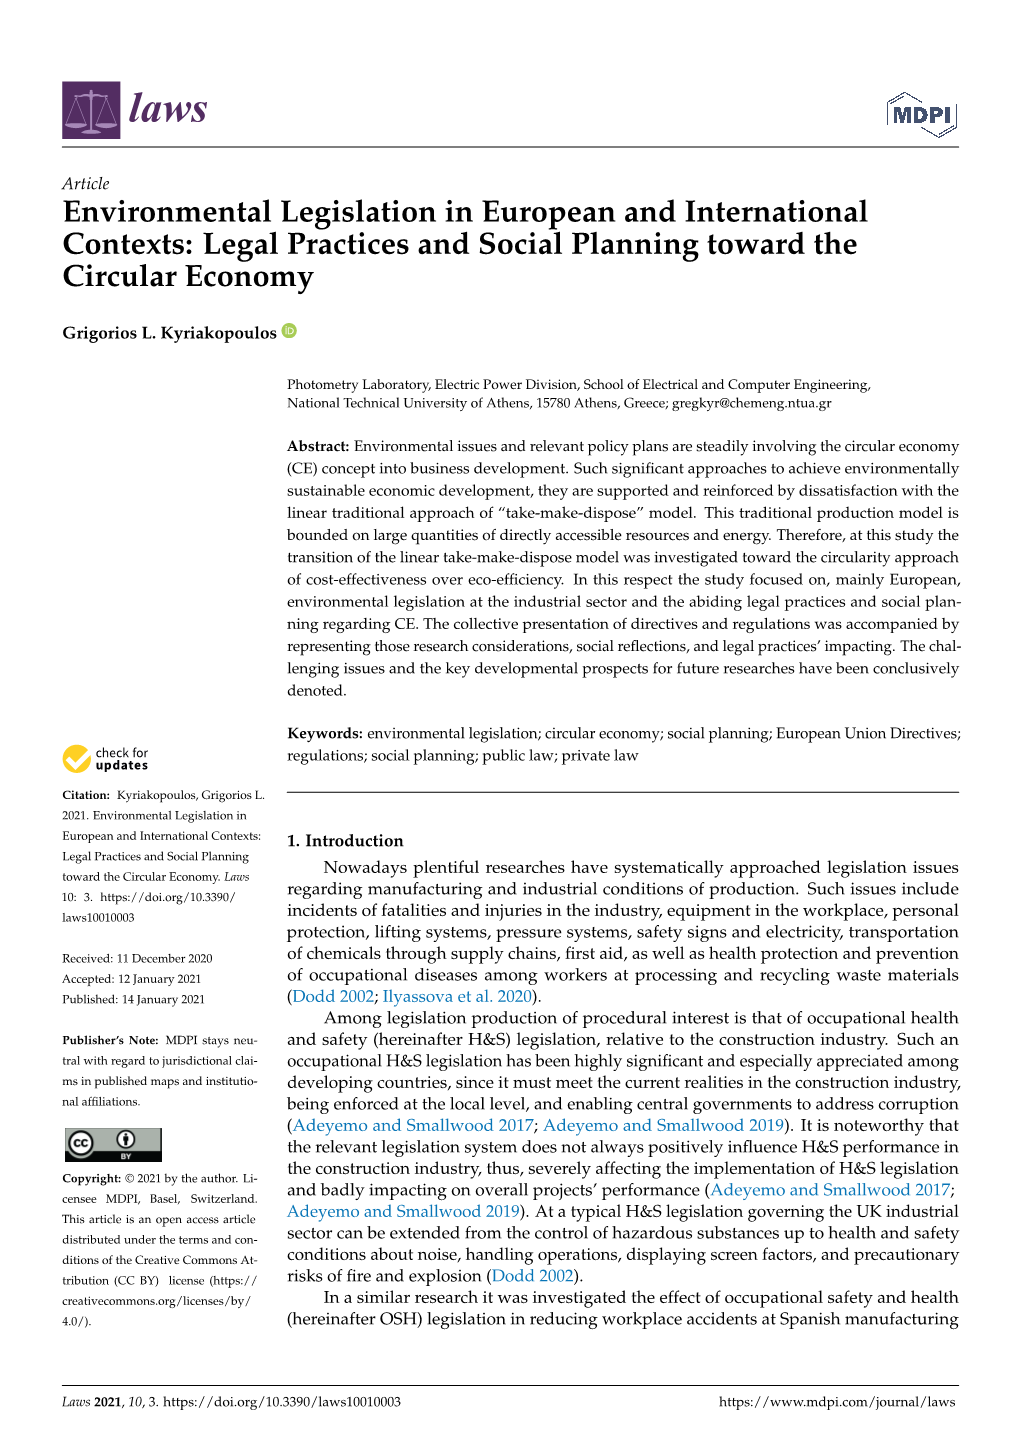 Environmental Legislation in European and International Contexts: Legal Practices and Social Planning Toward the Circular Economy